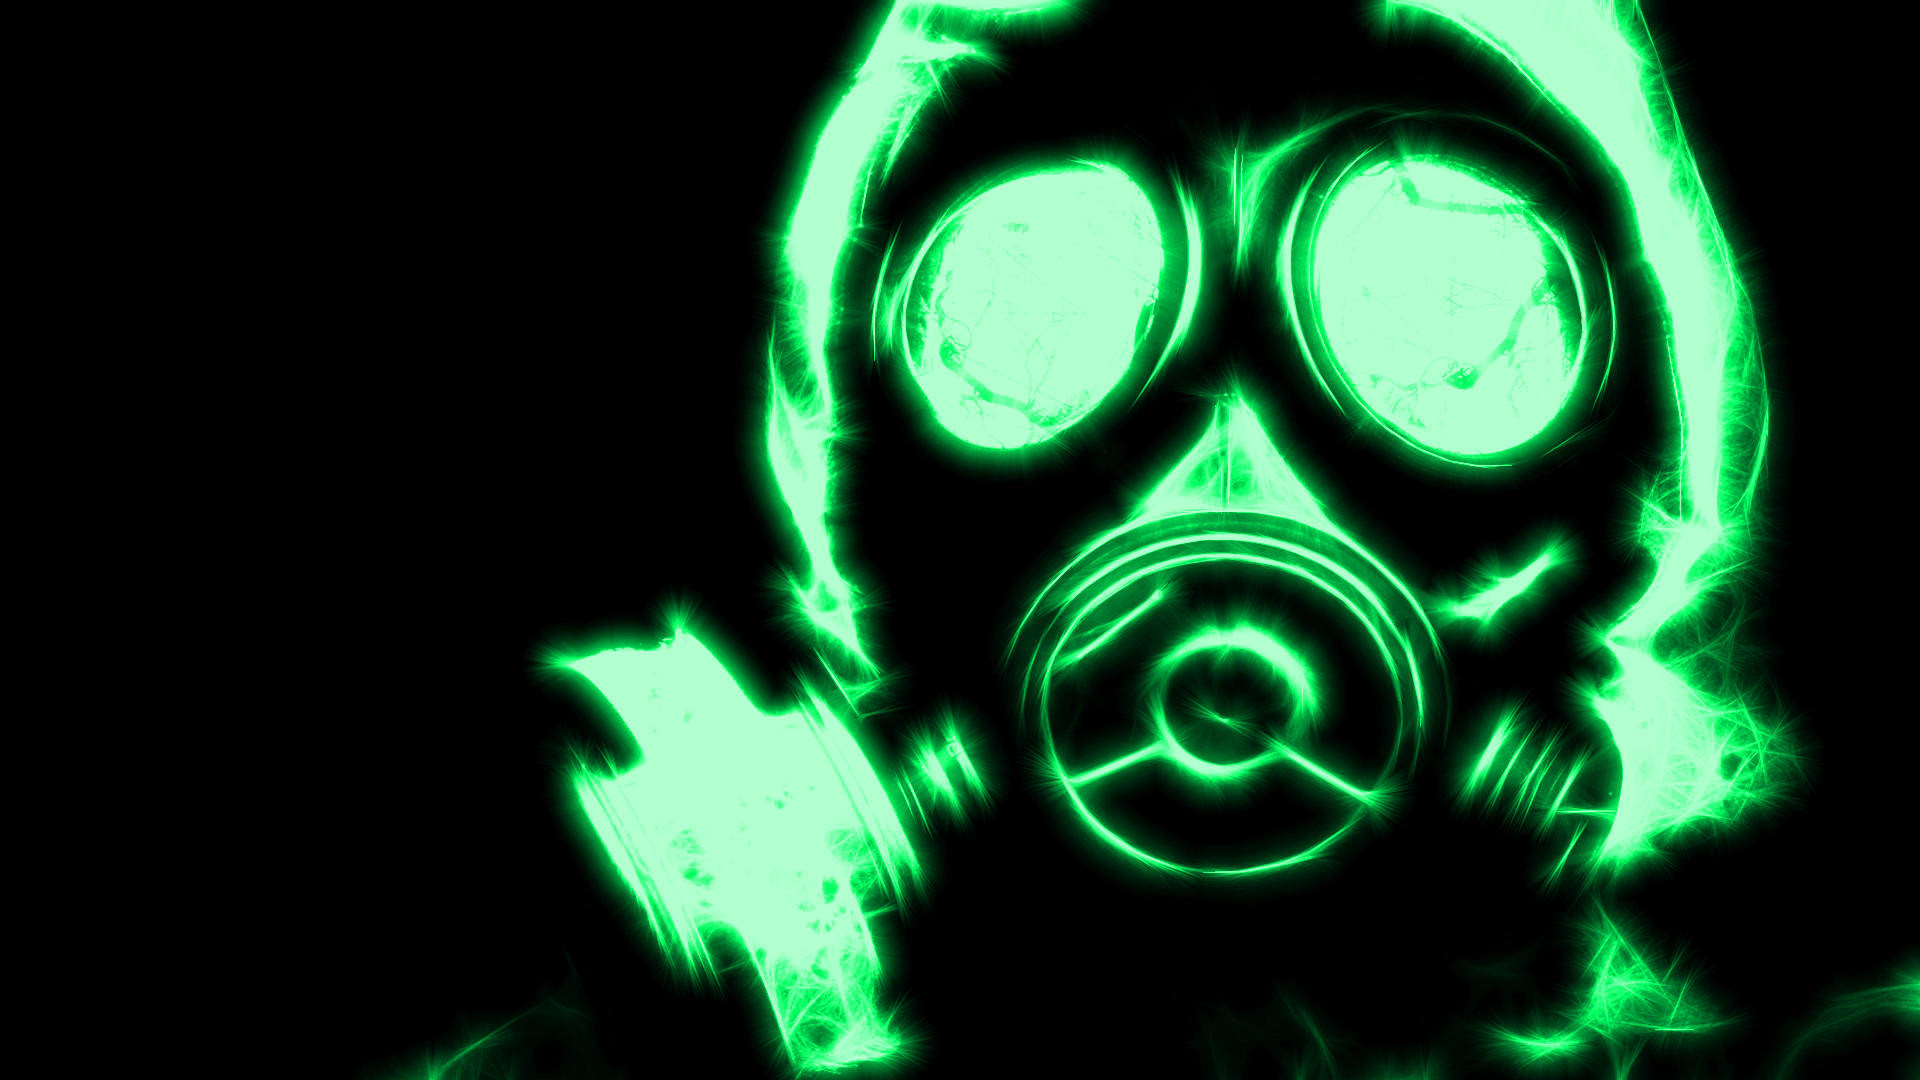 1920x1080 ... 2020 Other | Images: Gas Mask Wallpaper 1680x1050 ...